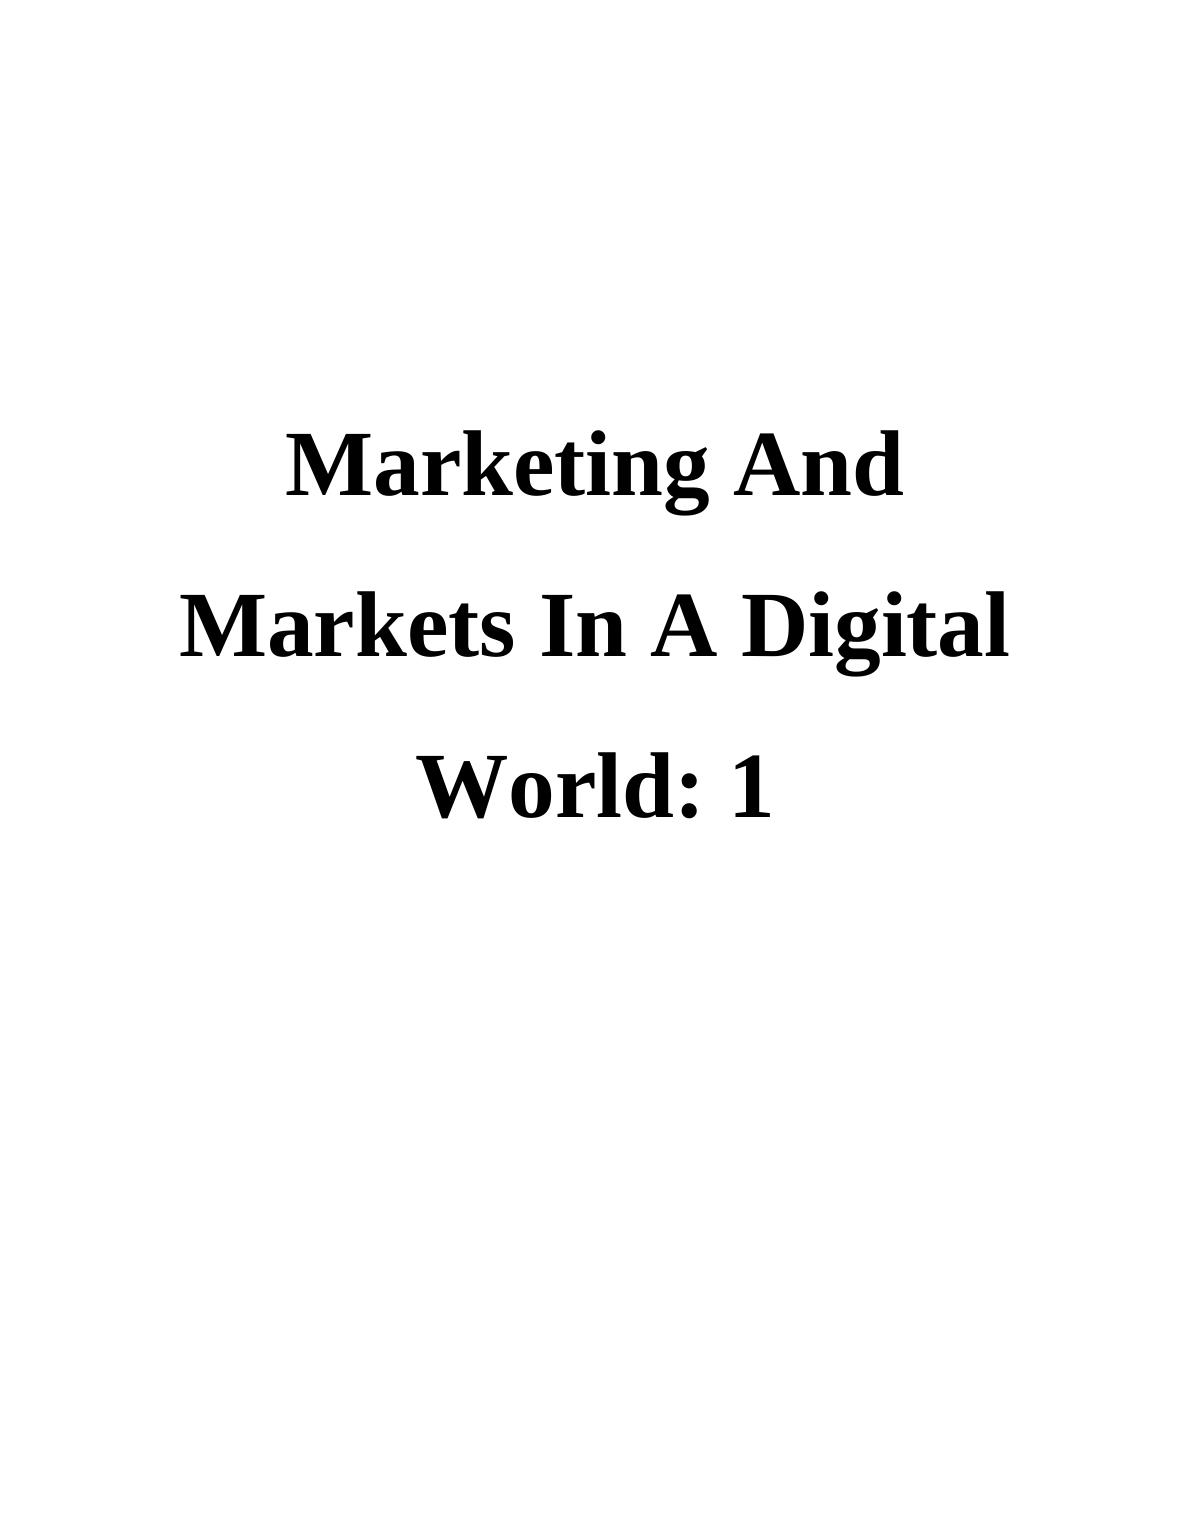 Marketing And Markets In A Digital World - Doc_1